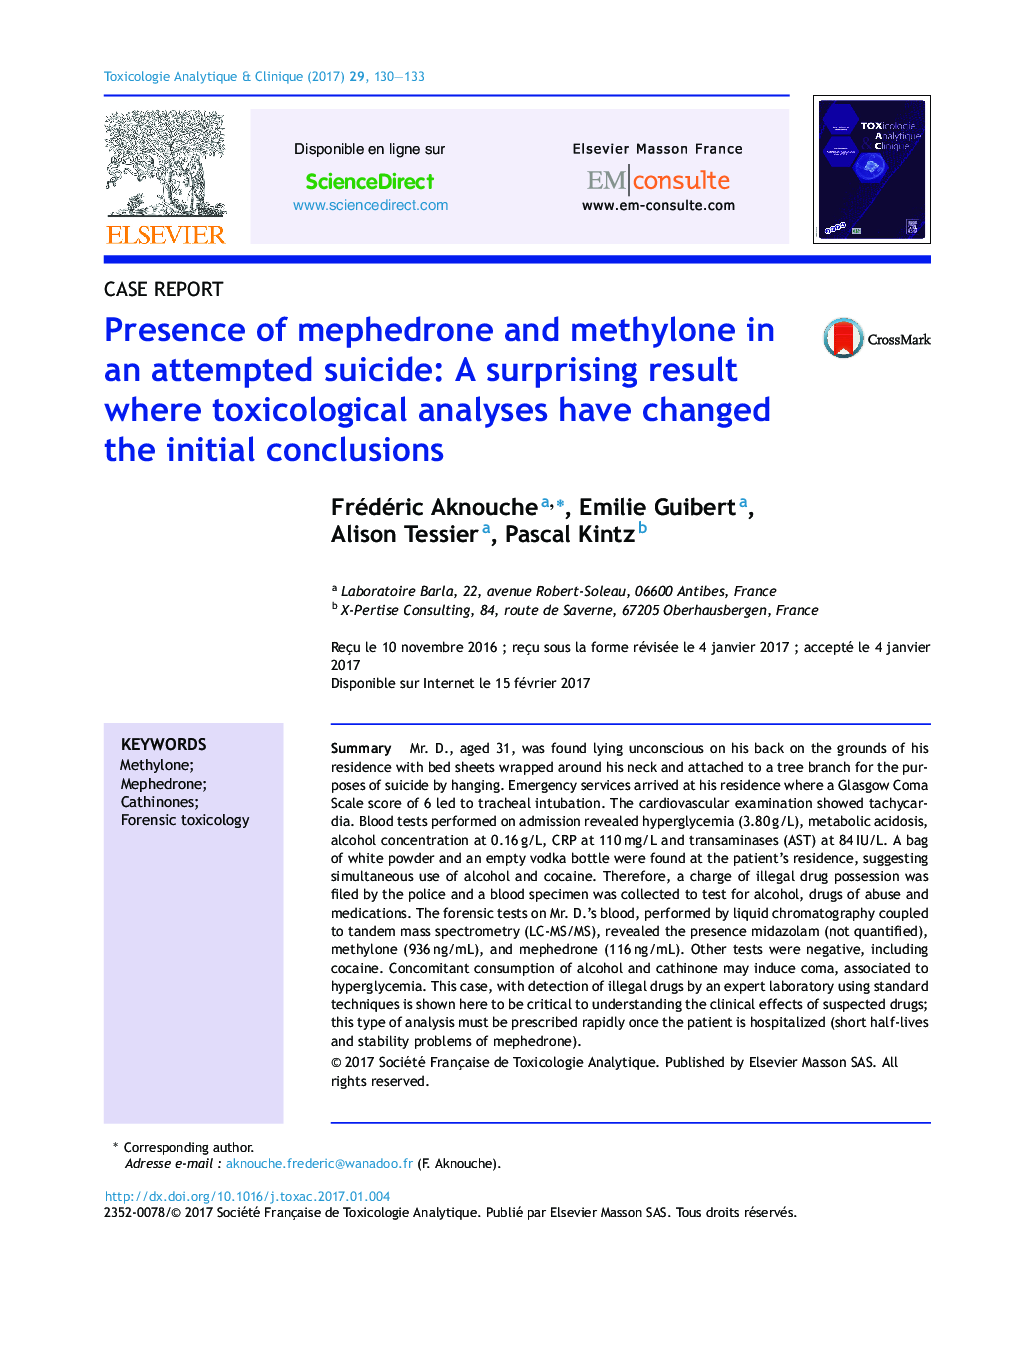 Presence of mephedrone and methylone in an attempted suicide: A surprising result where toxicological analyses have changed the initial conclusions